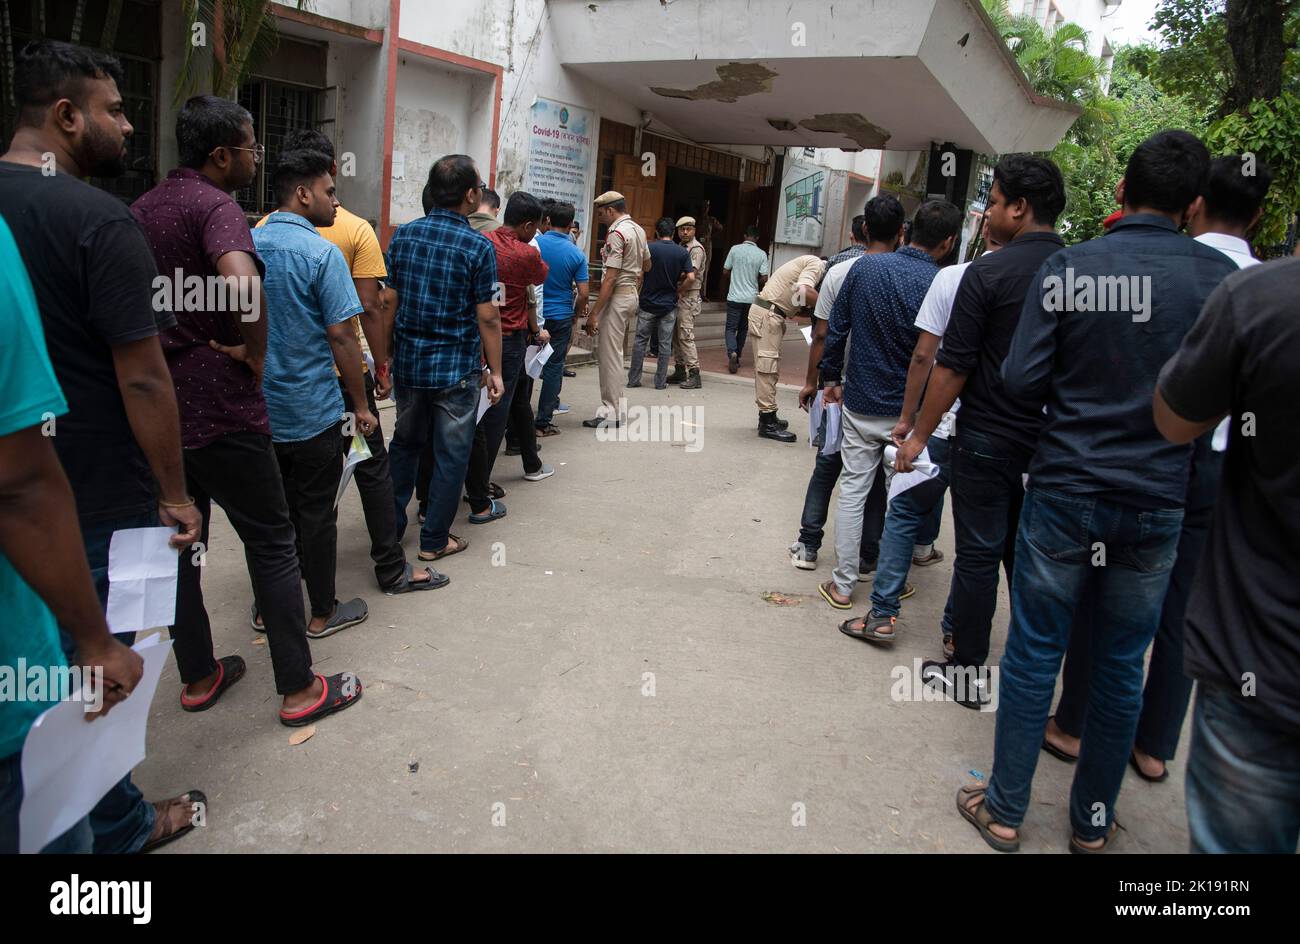 GUWAHATI, INDIA - AUGUST 28: Aspirants arrive to appear  in a written examination for Recruitment of Class III and IV posts, at a examination centre on August 28, 2022 in  Guwahati, India. More than 1.4 million candidates are expected to appear for nearly 30,000 Grade-III and -IV posts in Assam. Mobile internet services across 25 districts of Assam have been suspended during exam in order to prevent possible malpractices. Stock Photo